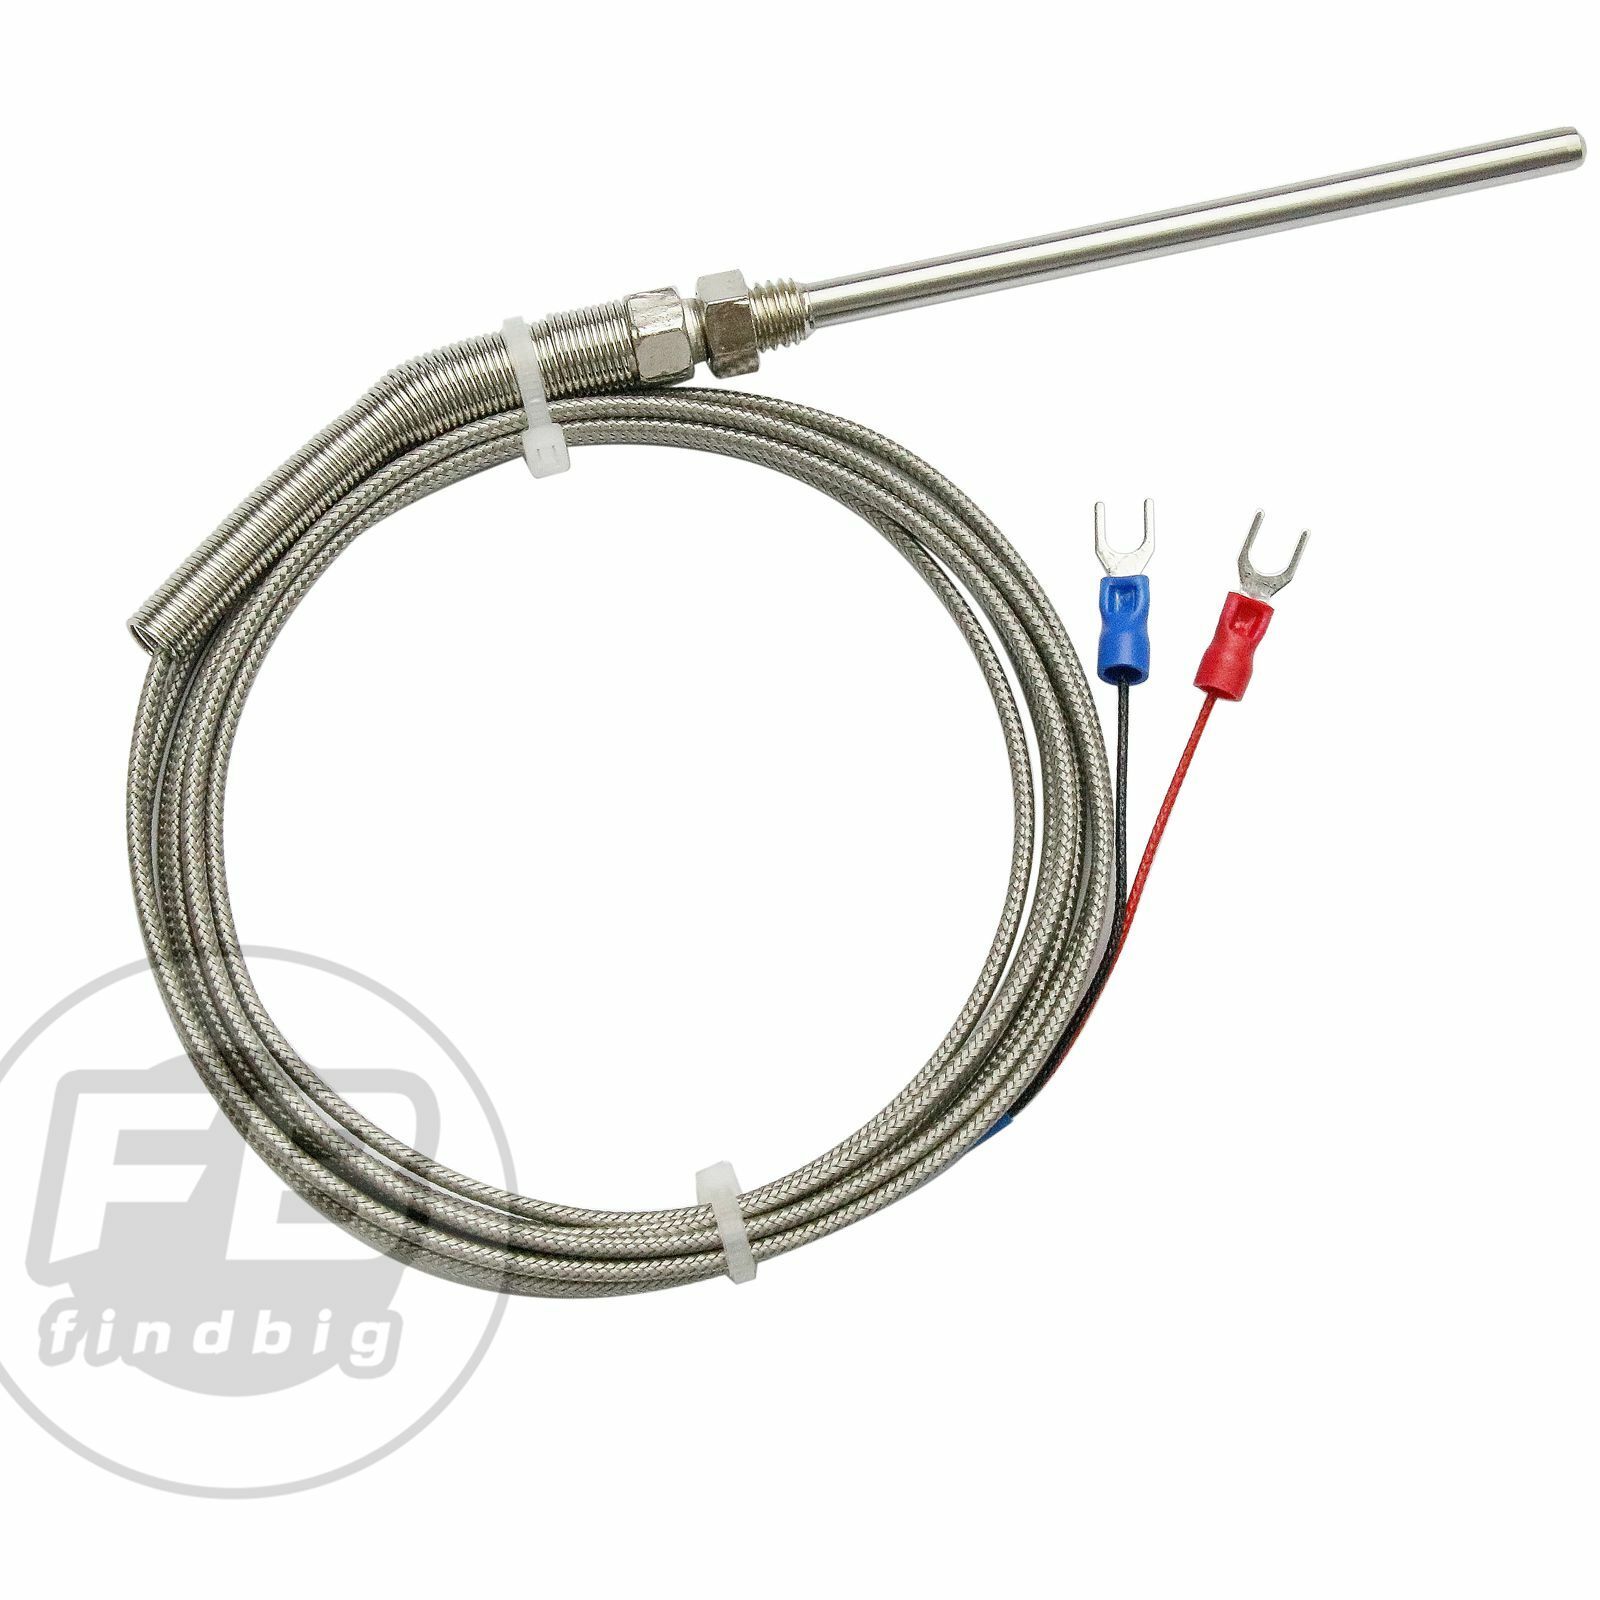 USA K Type 5*100mm M8 Screw Thread probe thermocouple with 2m Cable